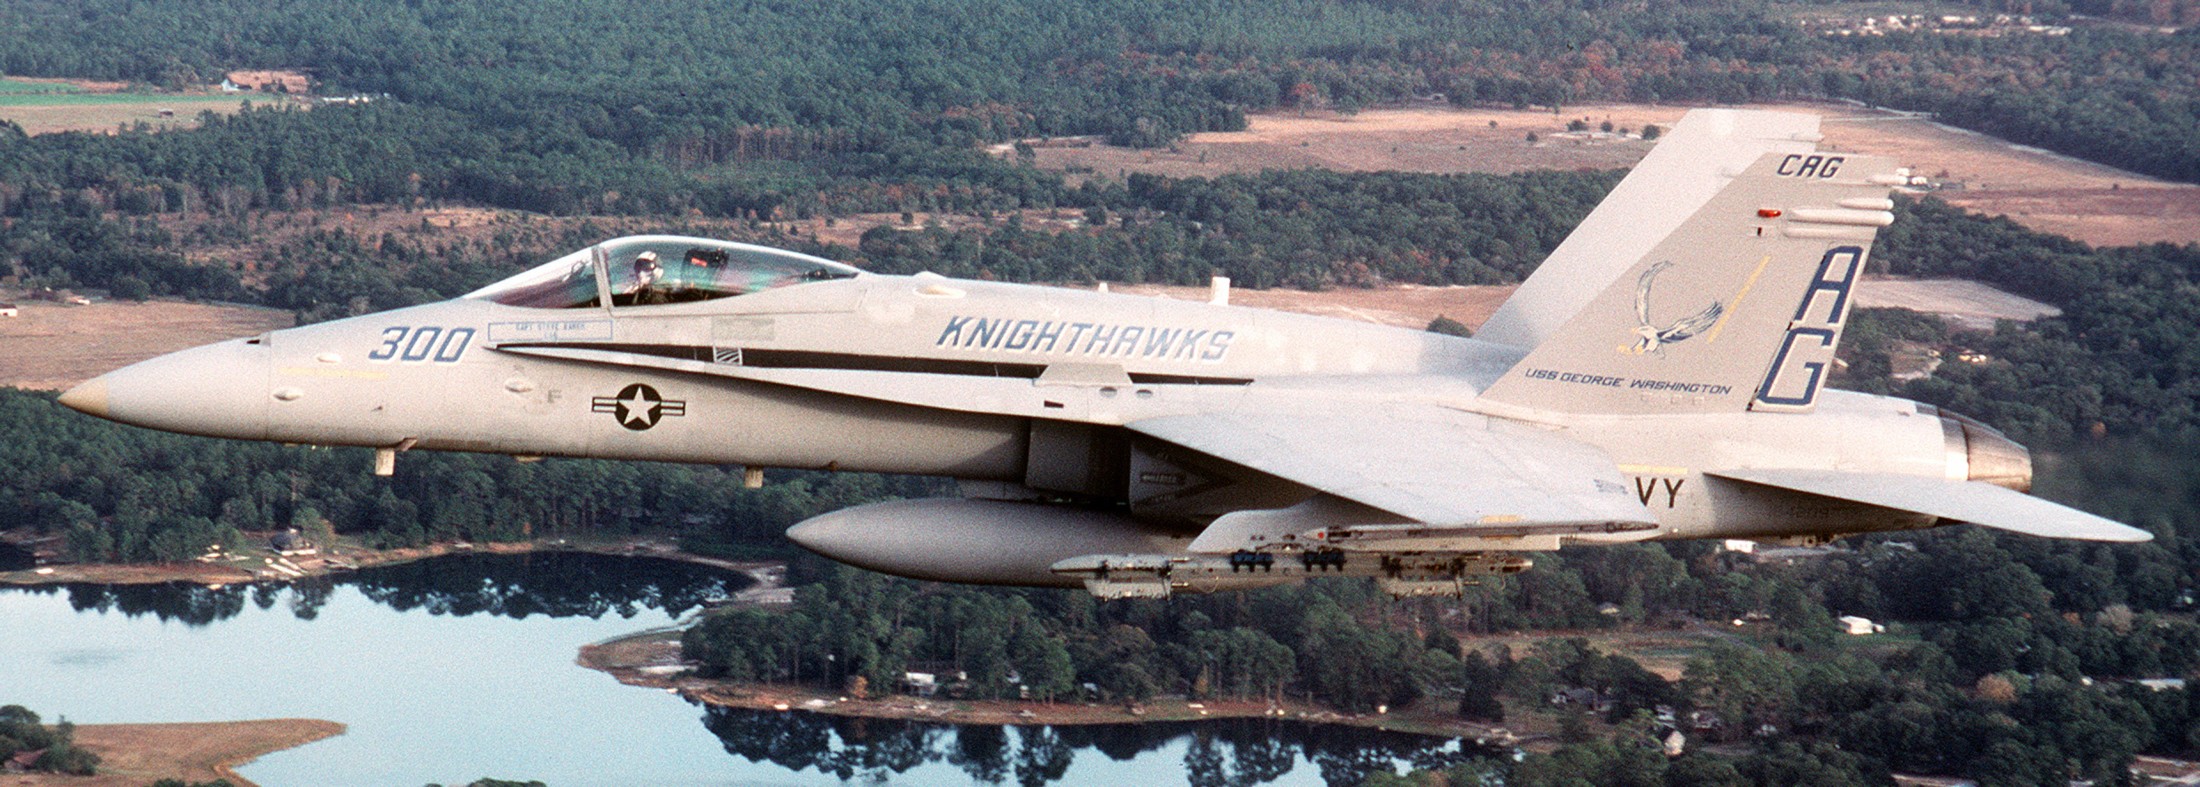 vfa-136 knighthawks strike fighter squadron f/a-18c hornet 1992 107 cvw-7 carrier air wing